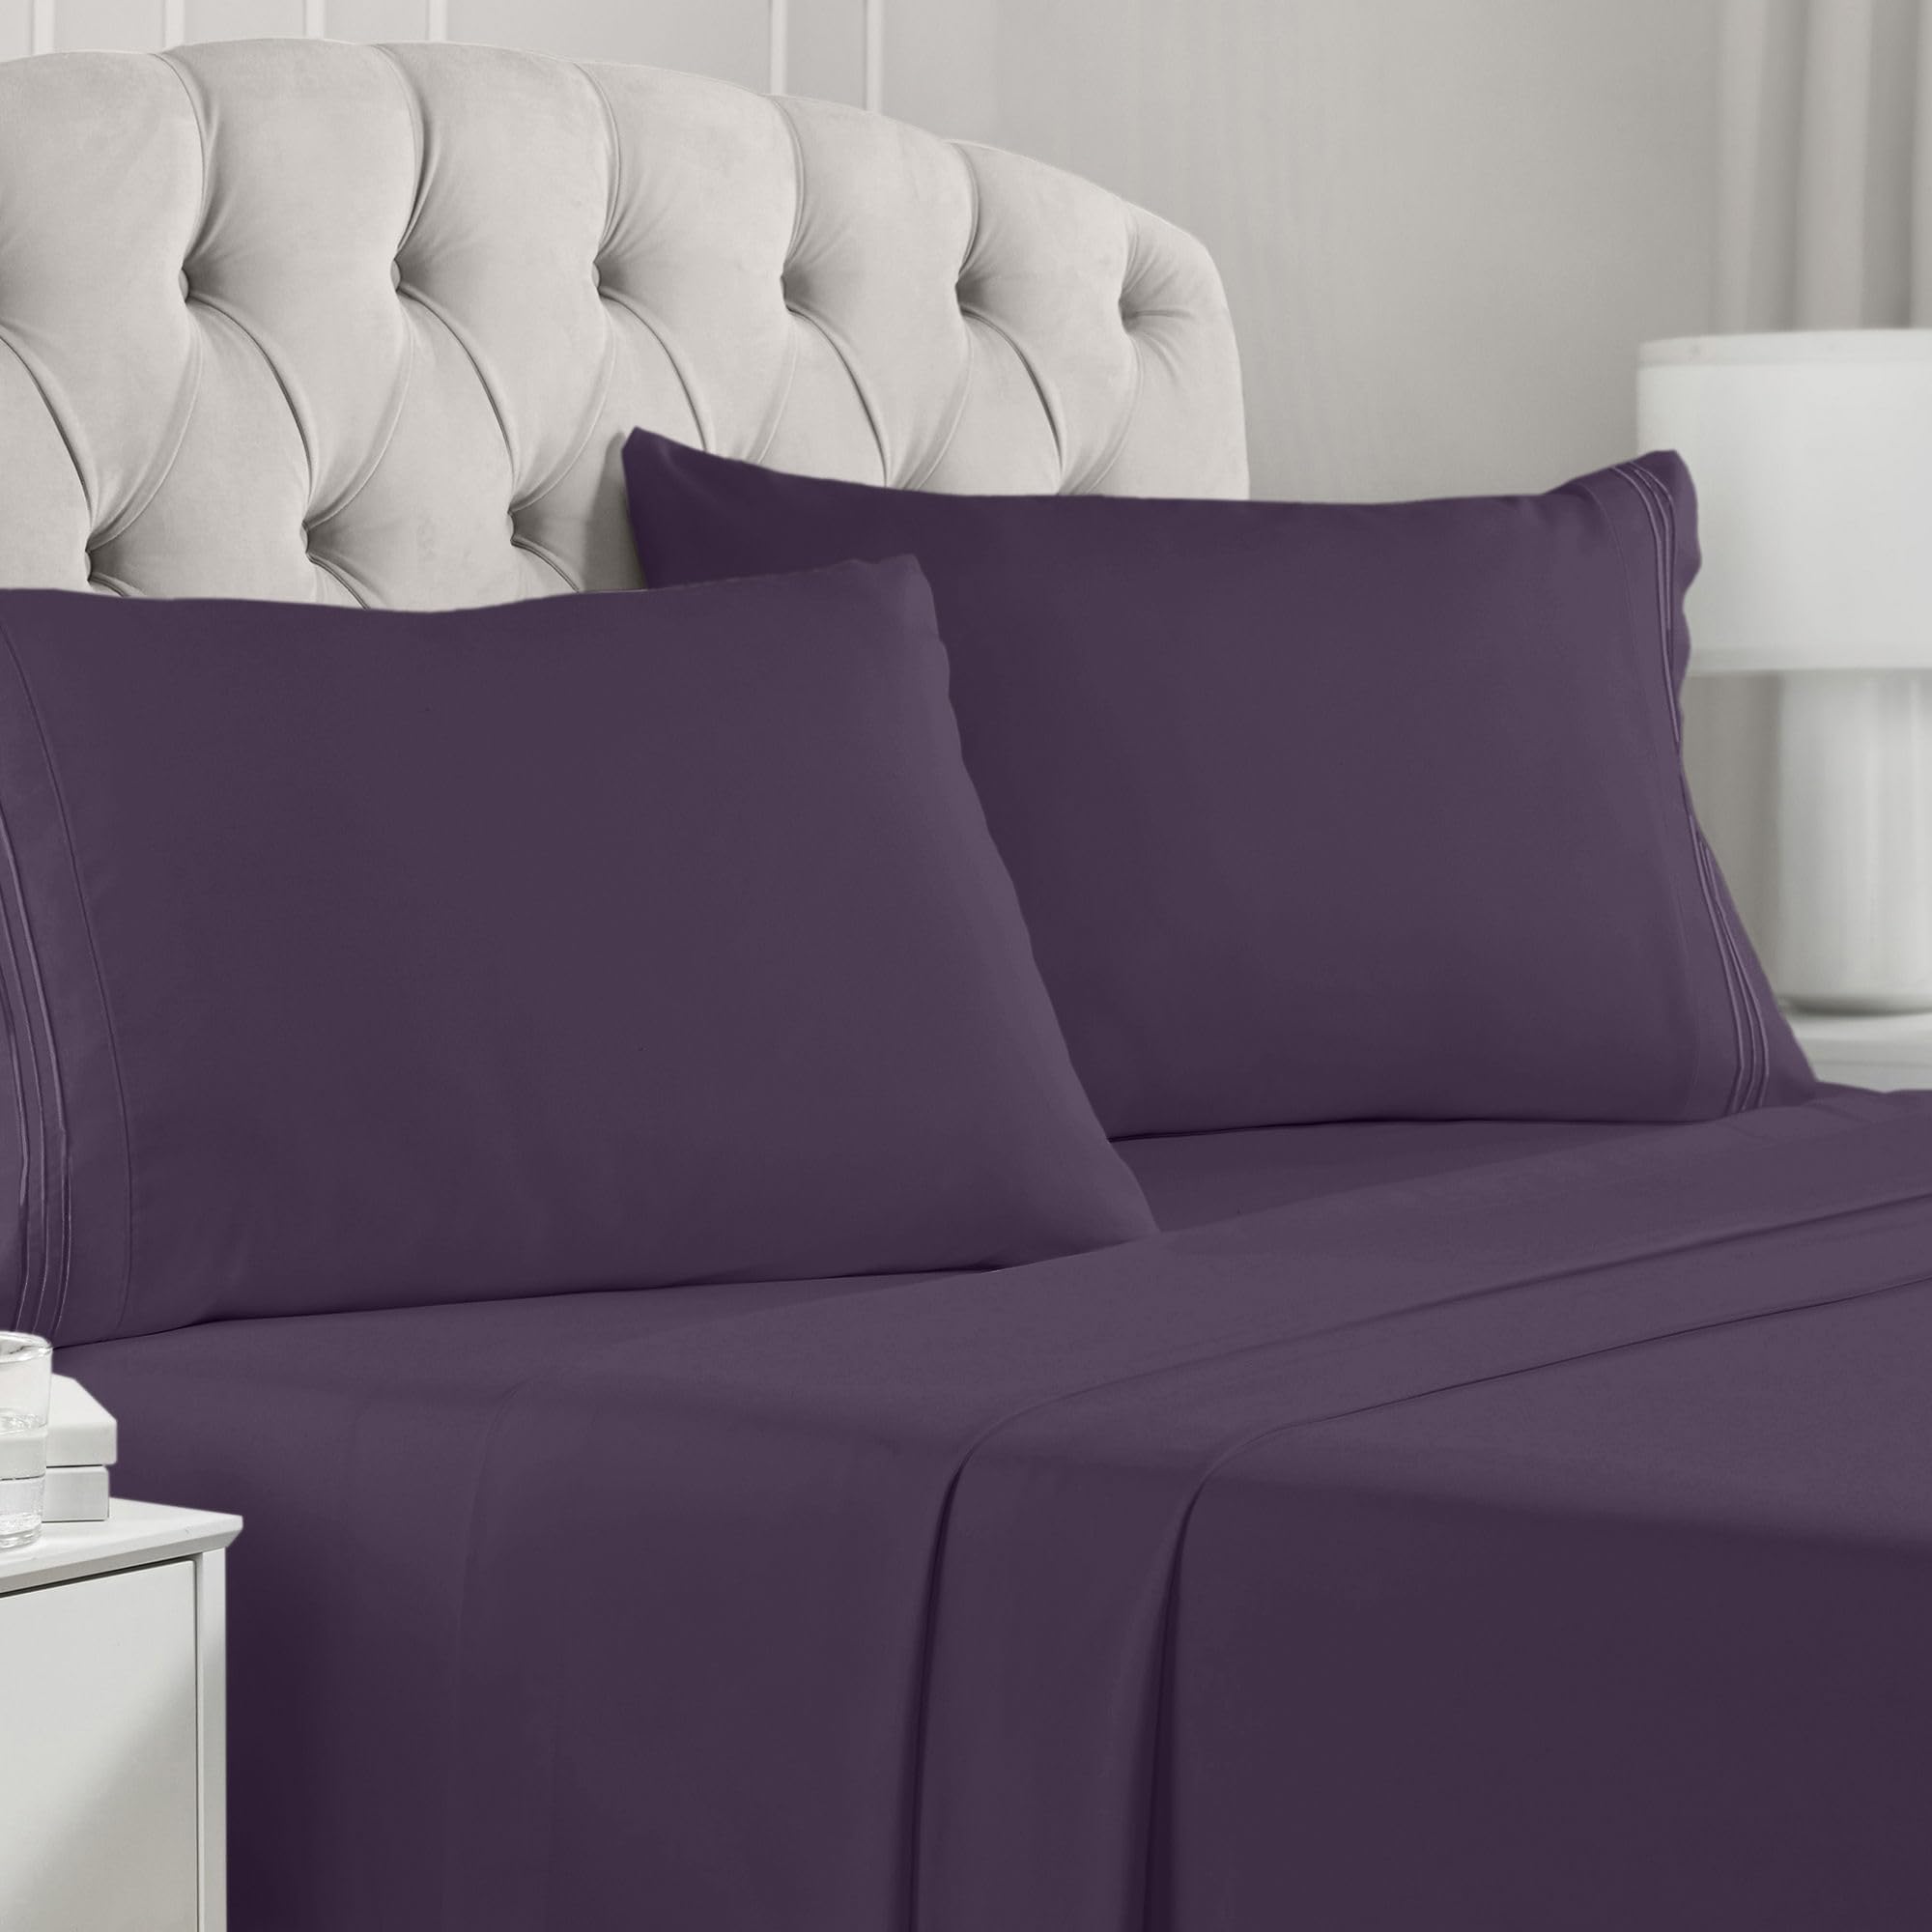 Book Cover Mellanni Bed Sheet Set - 1800 Bedding - Wrinkle, Fade, Stain Resistant - 4 Piece (Queen, Purple)